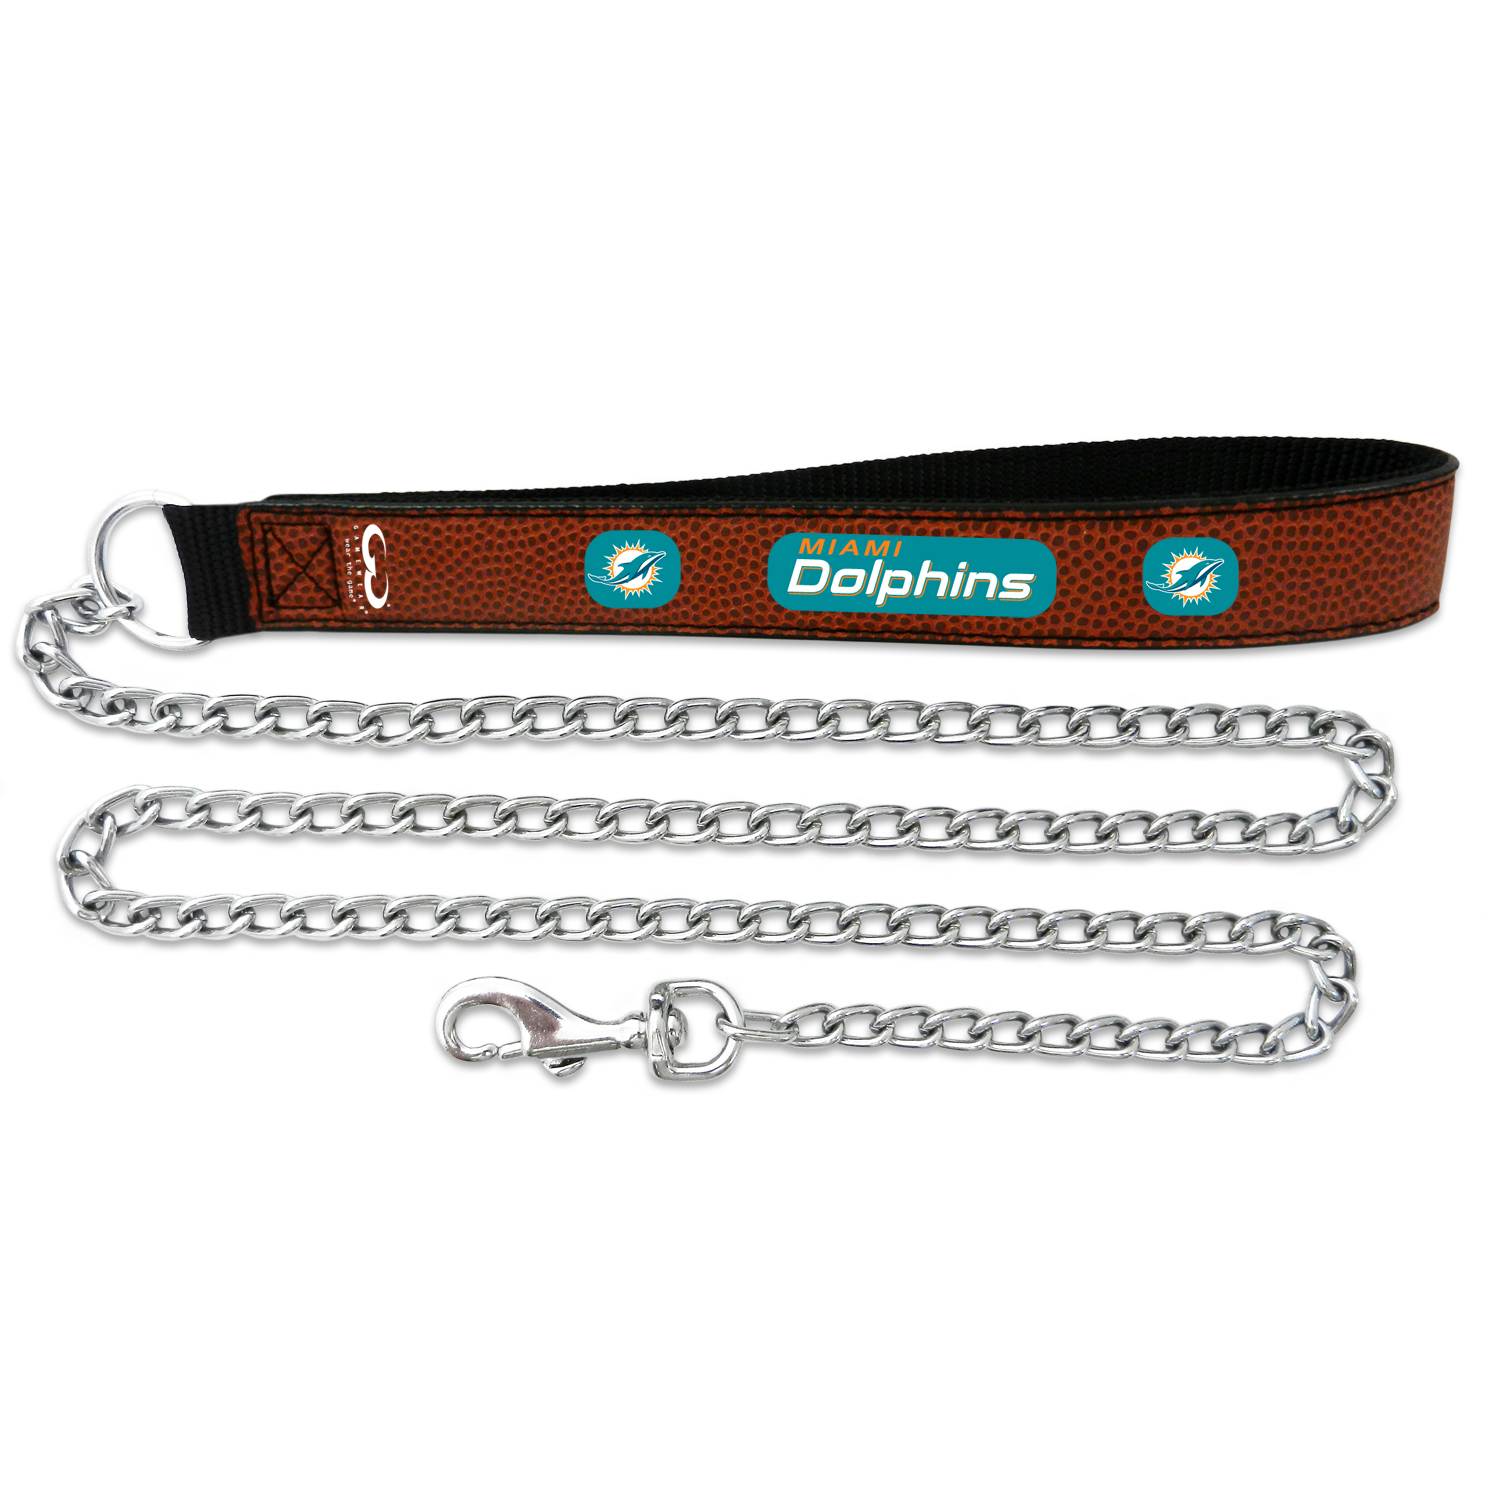 GAMEWEAR Miami Dolphins Football Leather Chain Leash